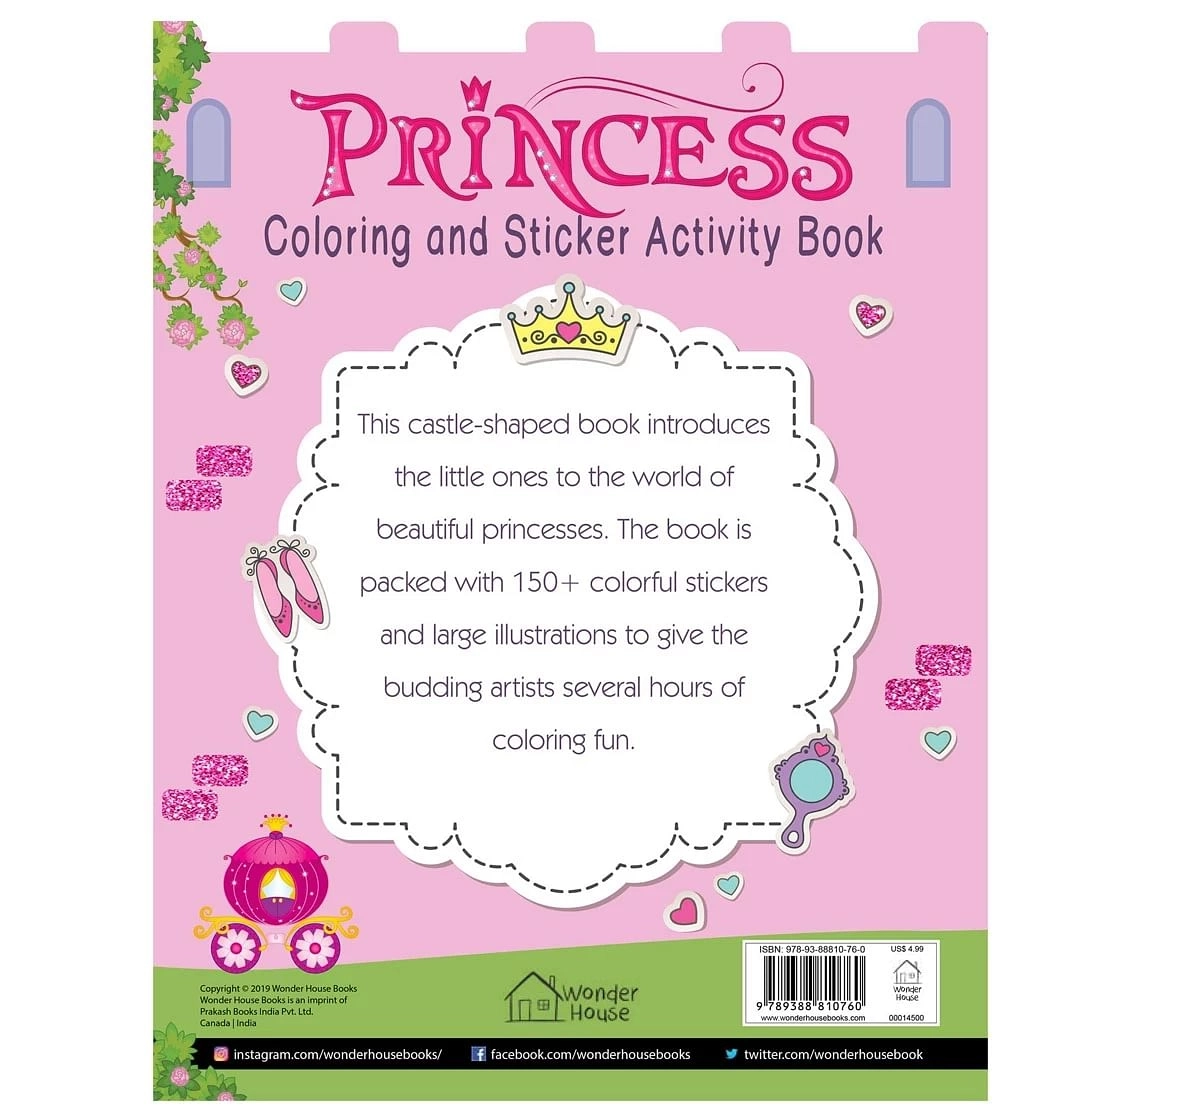 Big Jumbo Coloring Book: HUGE Toddler Coloring Book with 150